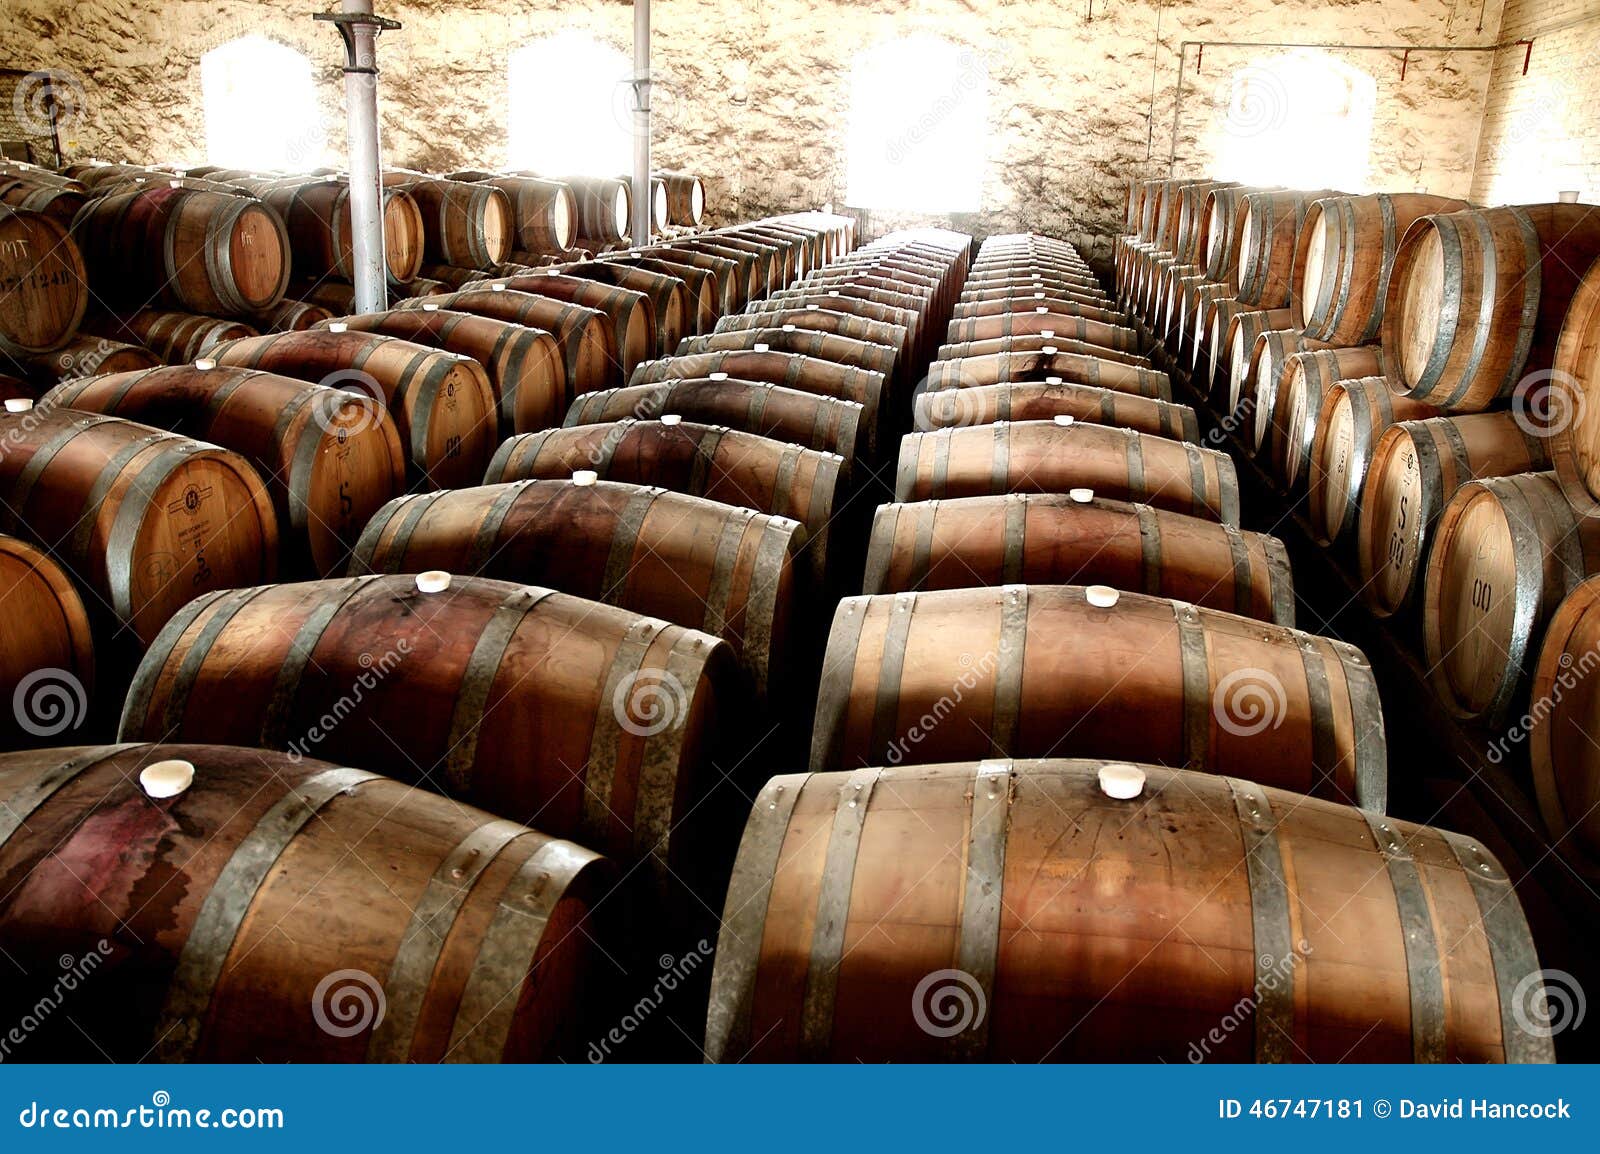 photo of historical wine barrels in a row